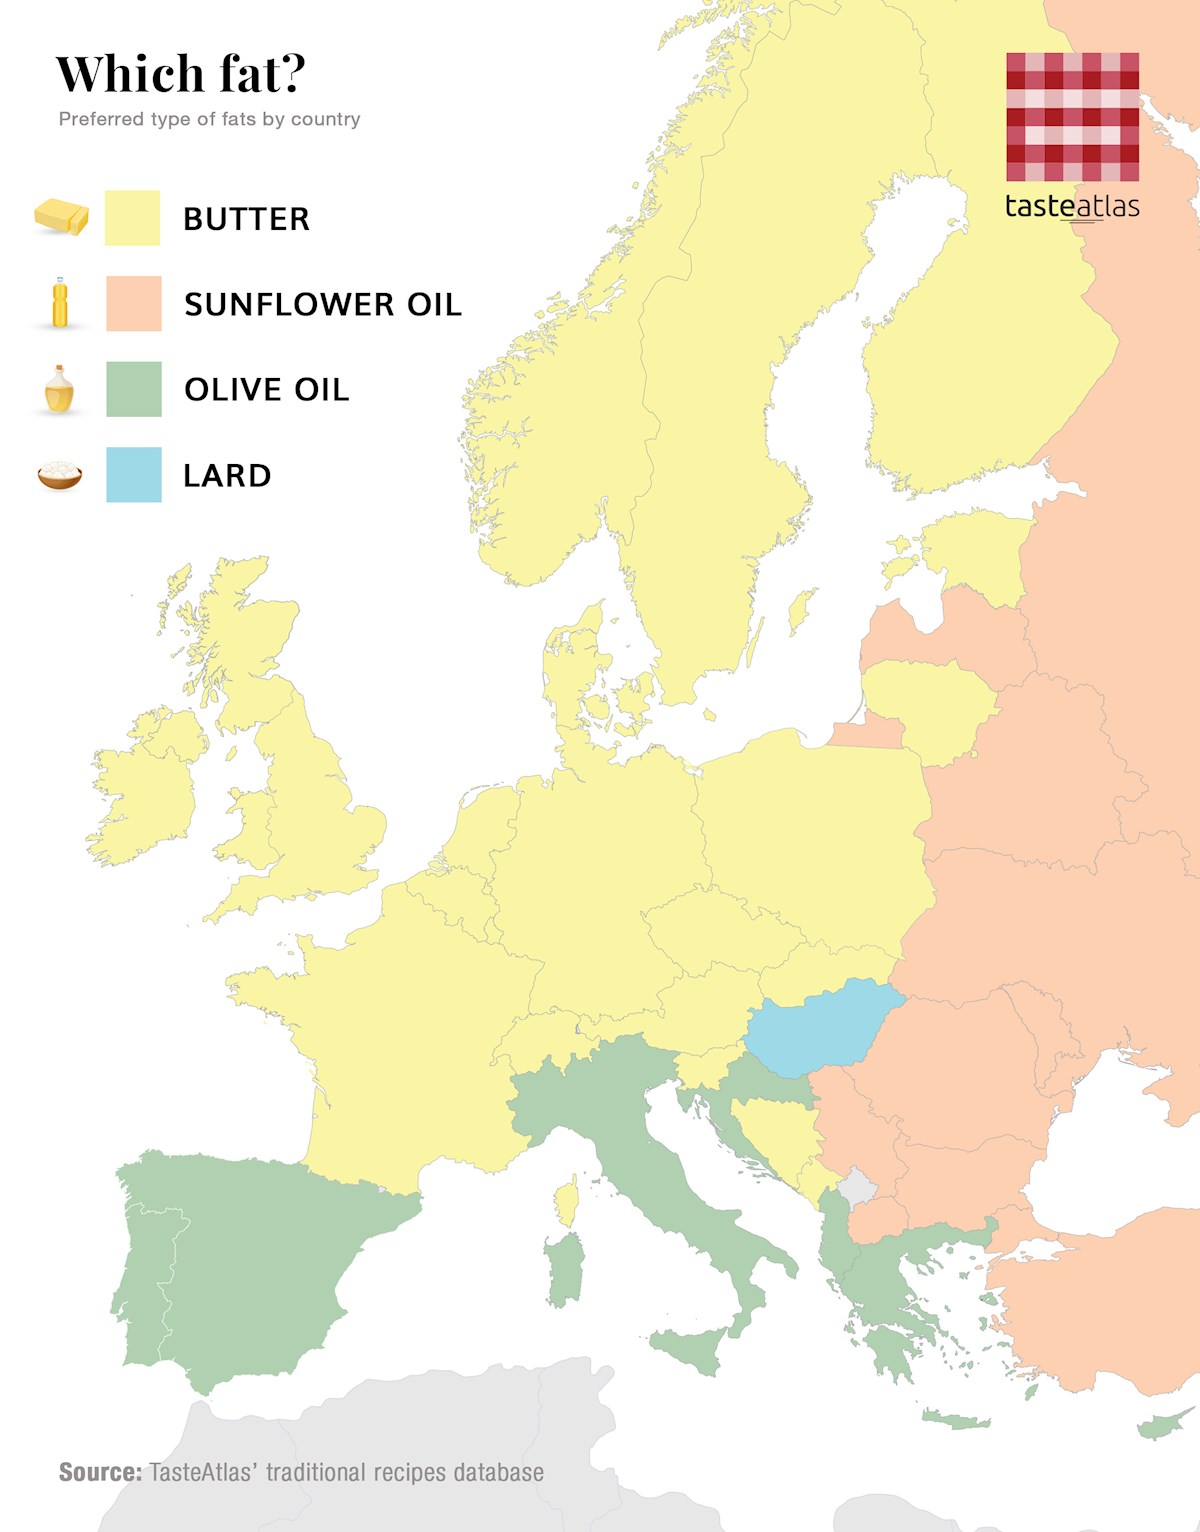 Preferred type of fat in each European country